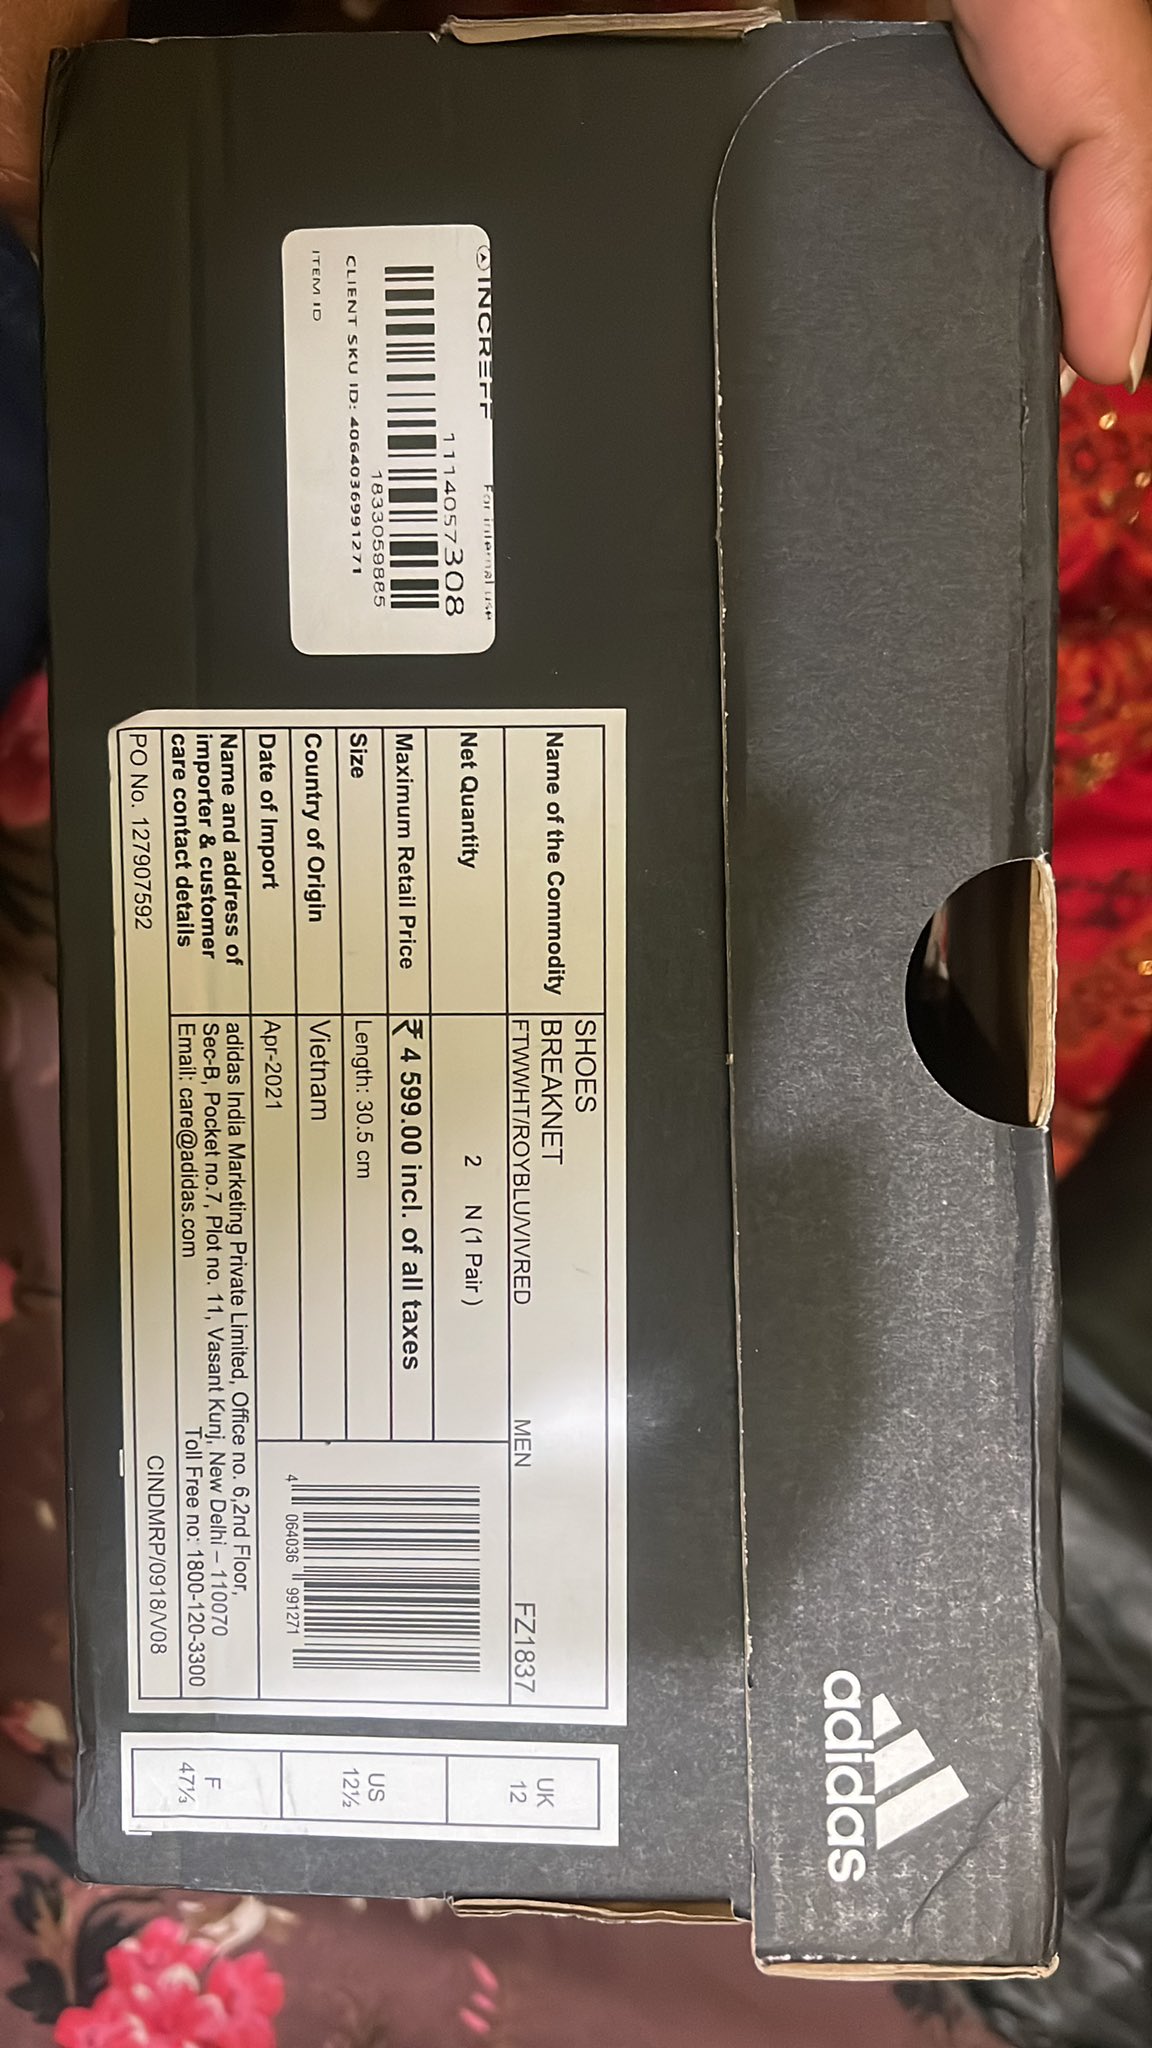 singh on Twitter: "My shoes returned details.. from months didn't refund my money what nonsense is this ..dear adidas do you want more money I can give you ??